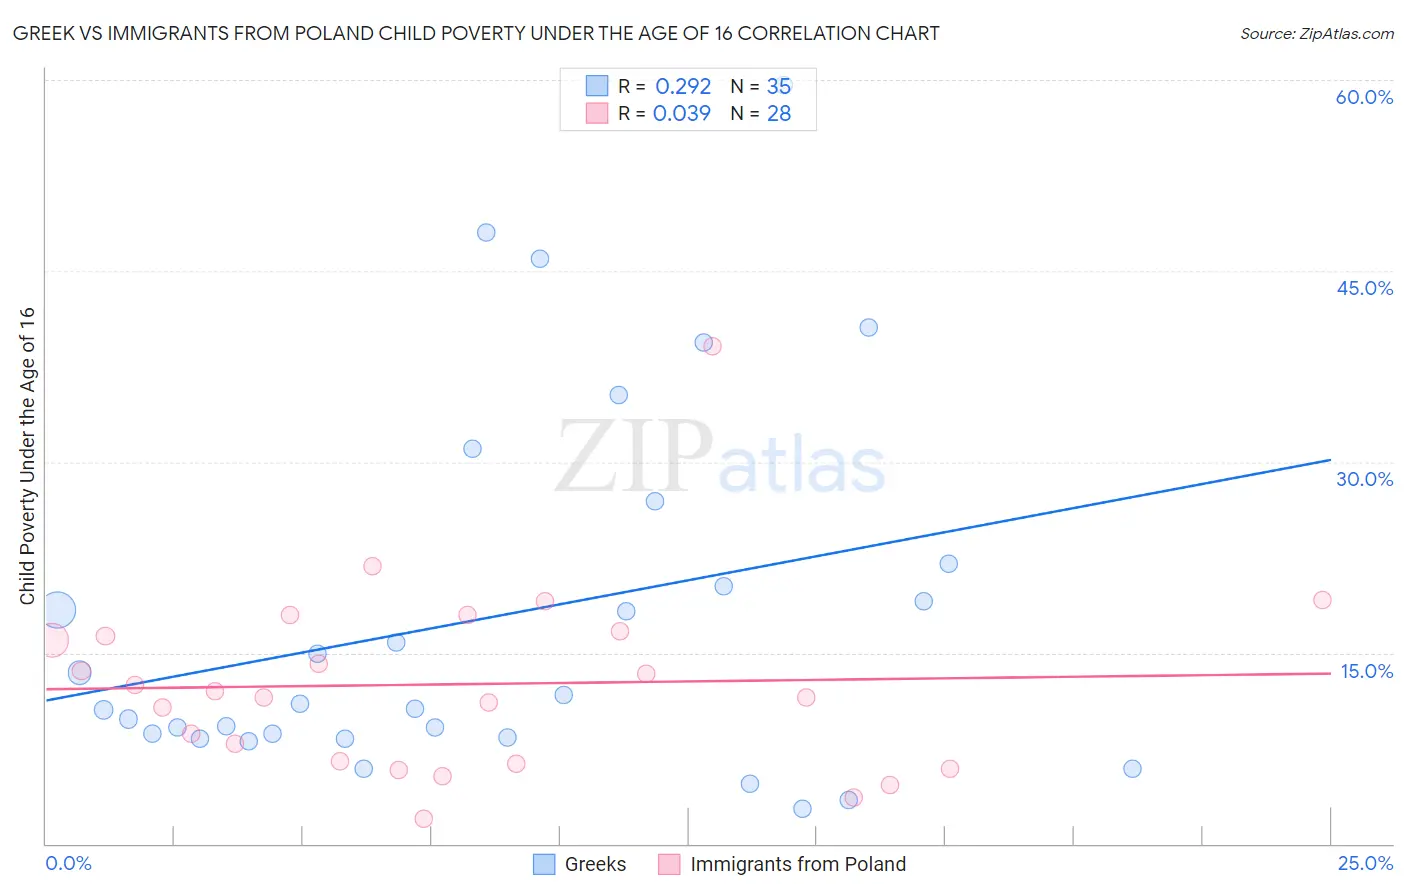 Greek vs Immigrants from Poland Child Poverty Under the Age of 16